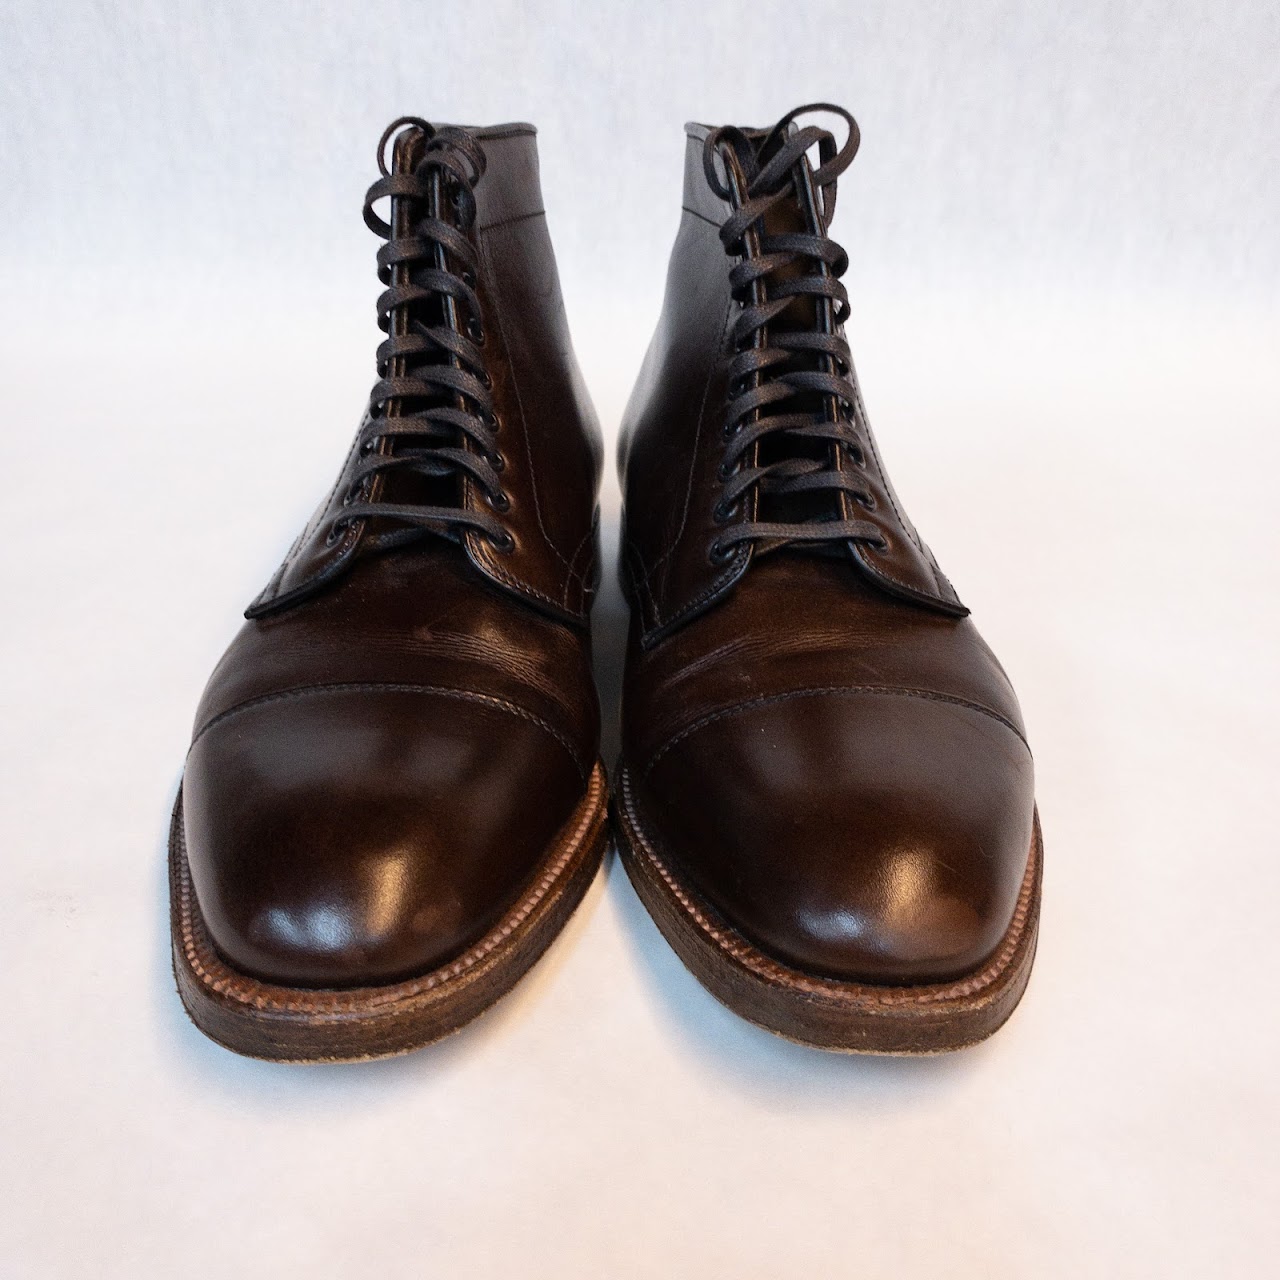 Alden, New England Straight Tip Ankle Boots